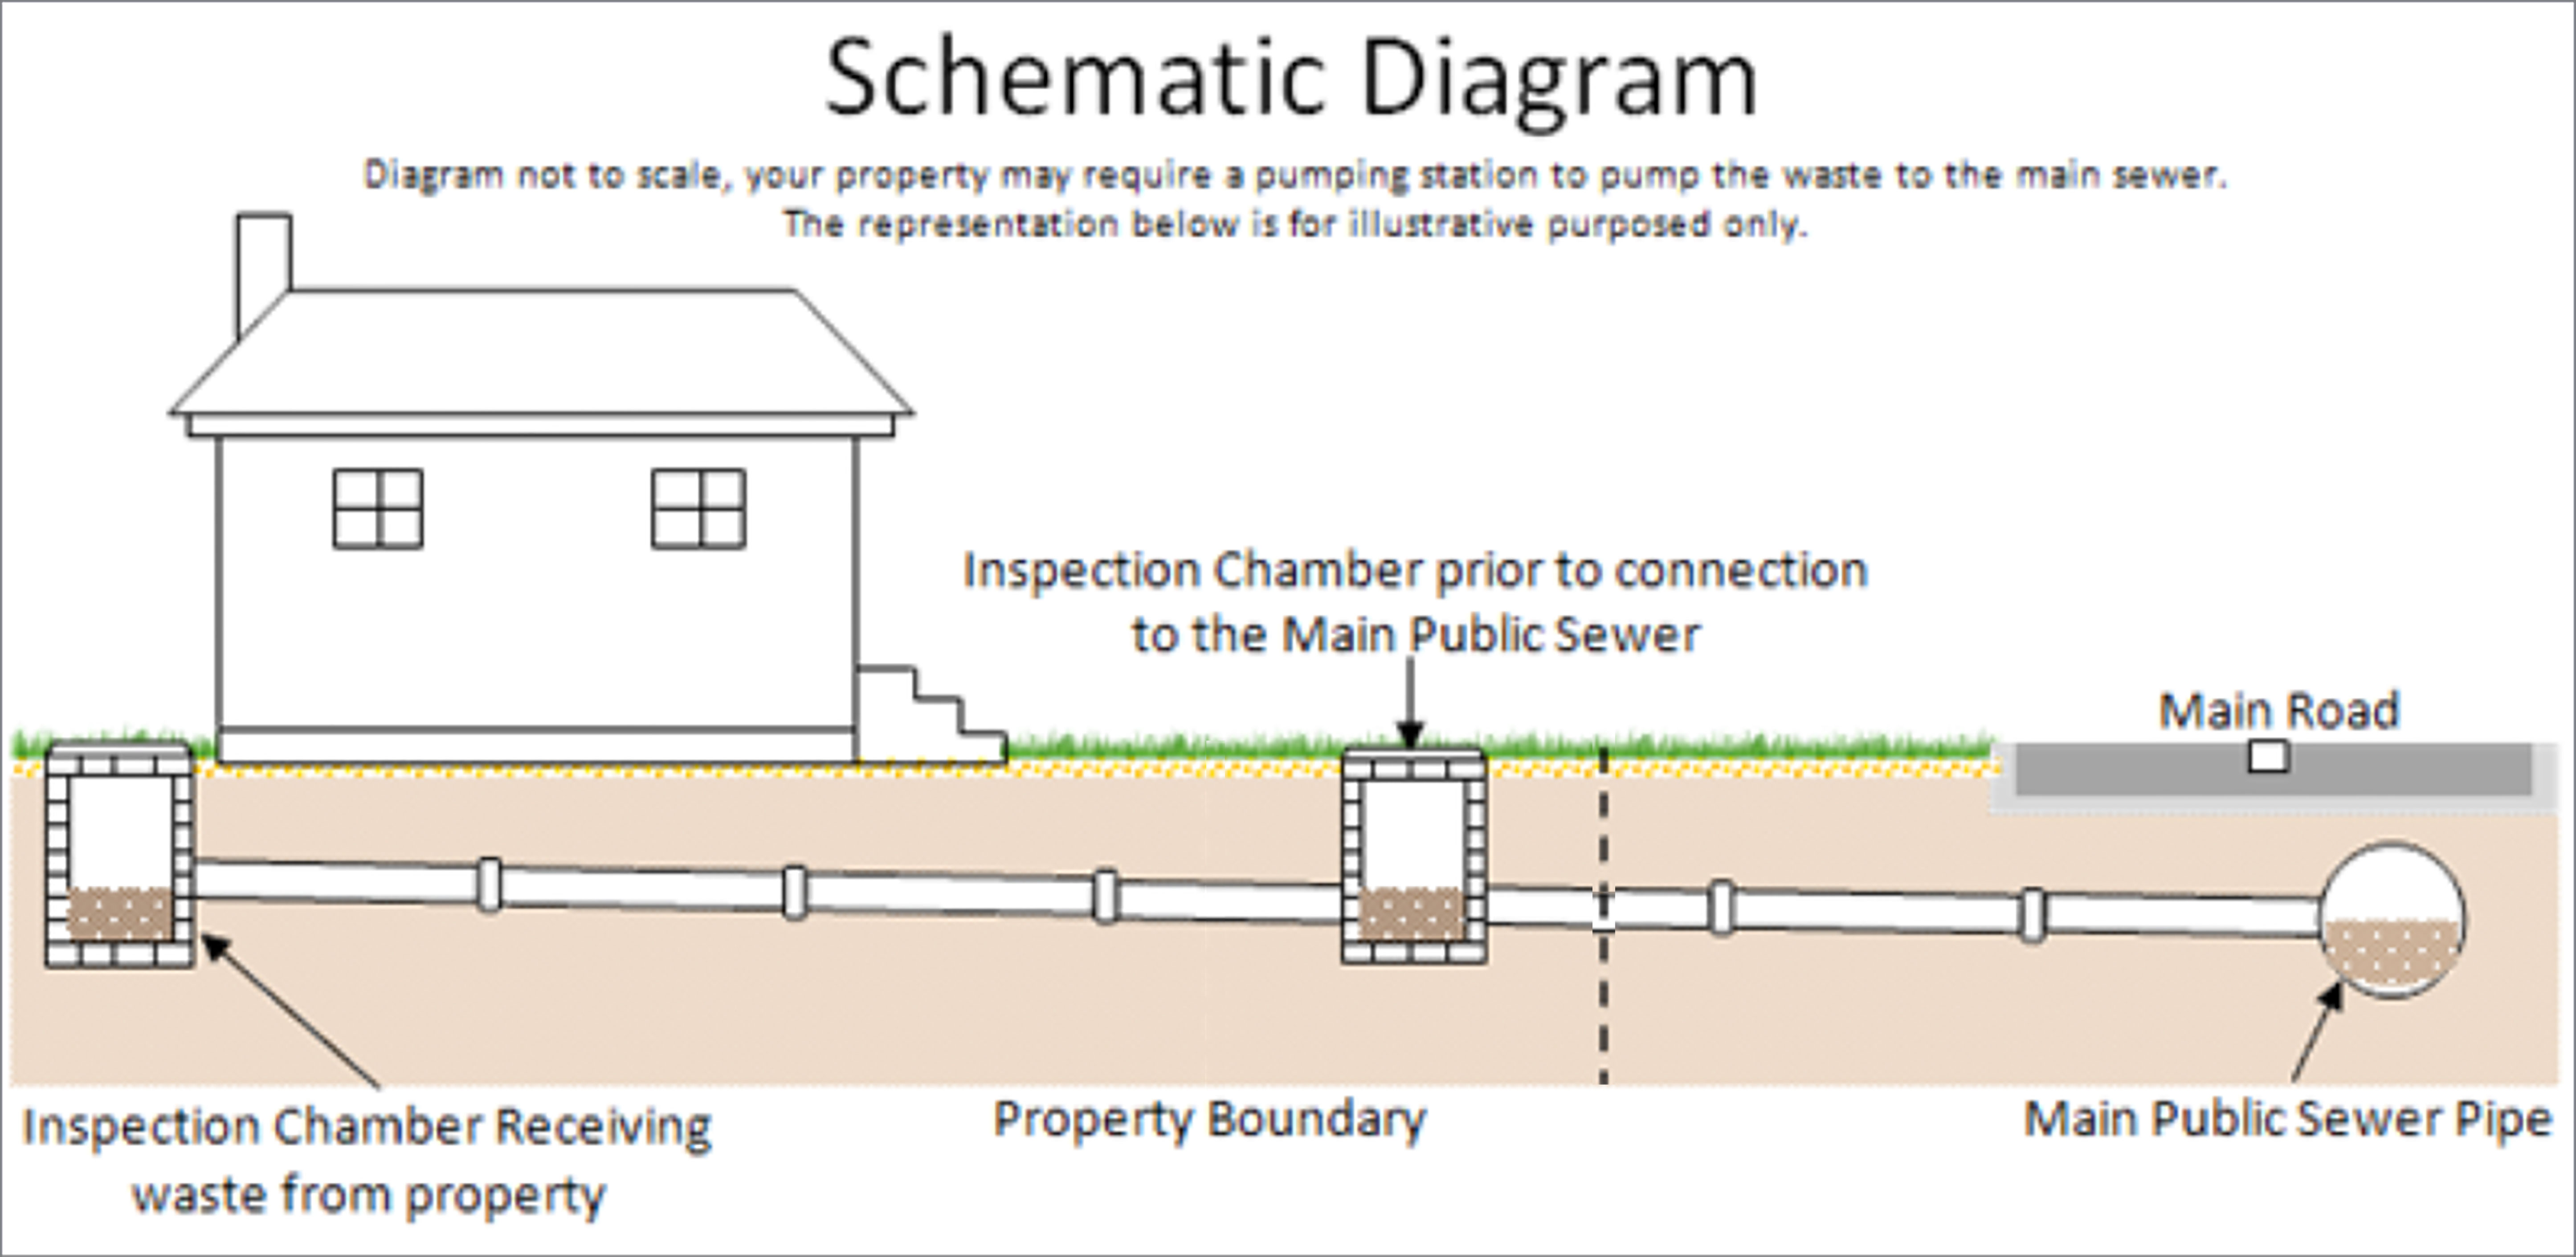 A schematic diagram showing an example property's boundary in relation to the main public sewer. If this distance is too long or up hill then a pumping station may be required.